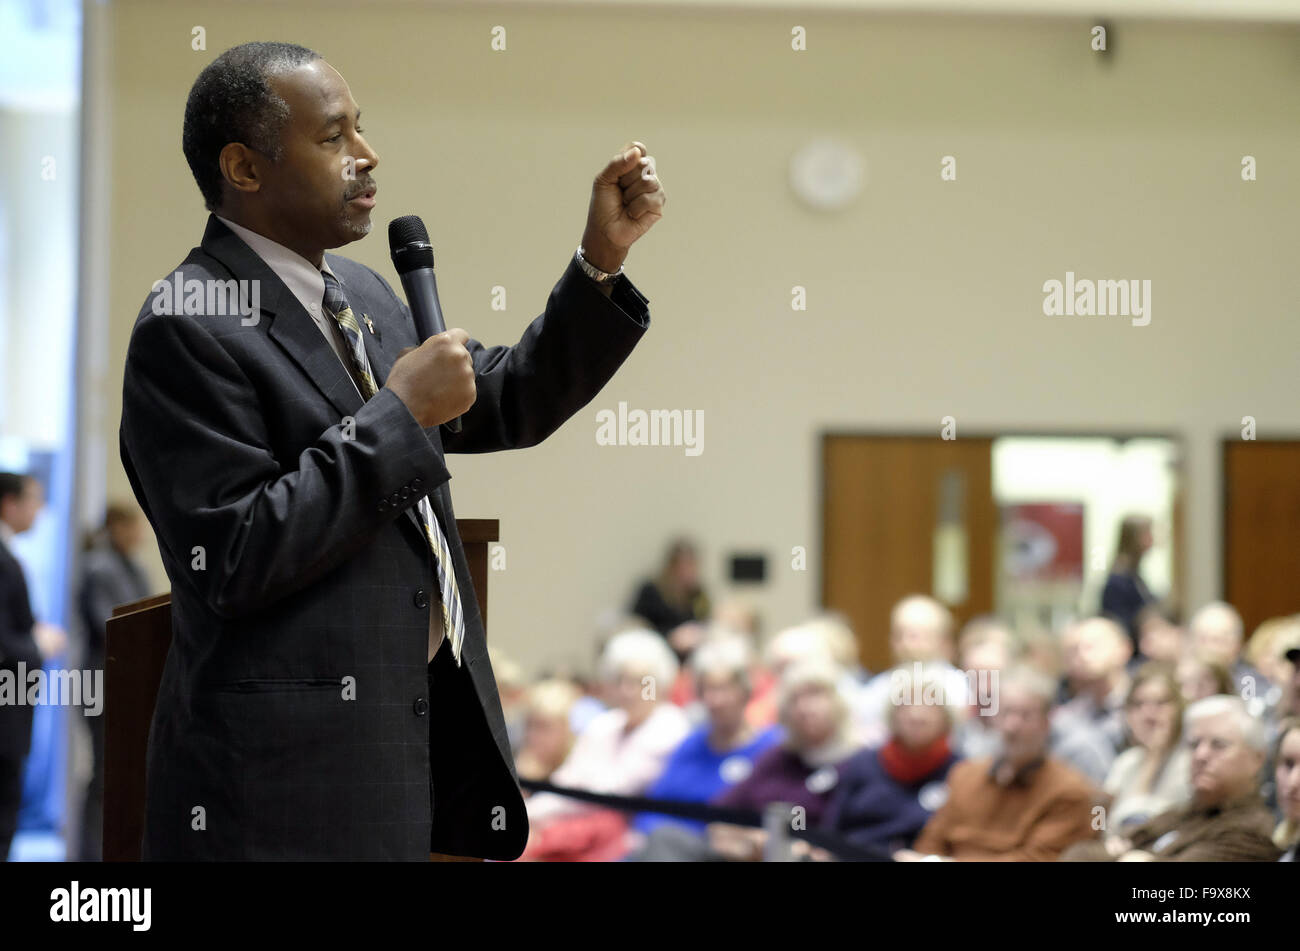 Orange City, IOWA, USA. 18th Dec, 2015. Republican Presidential candidate Dr. BEN CARSON speaks at the private Christian school, Northwestern College, about his Christian faith and the direction the U.S. is currently going while campaigning in Orange City Iowa, Friday, Dec. 18, 2015. Credit:  Jerry Mennenga/ZUMA Wire/Alamy Live News Stock Photo